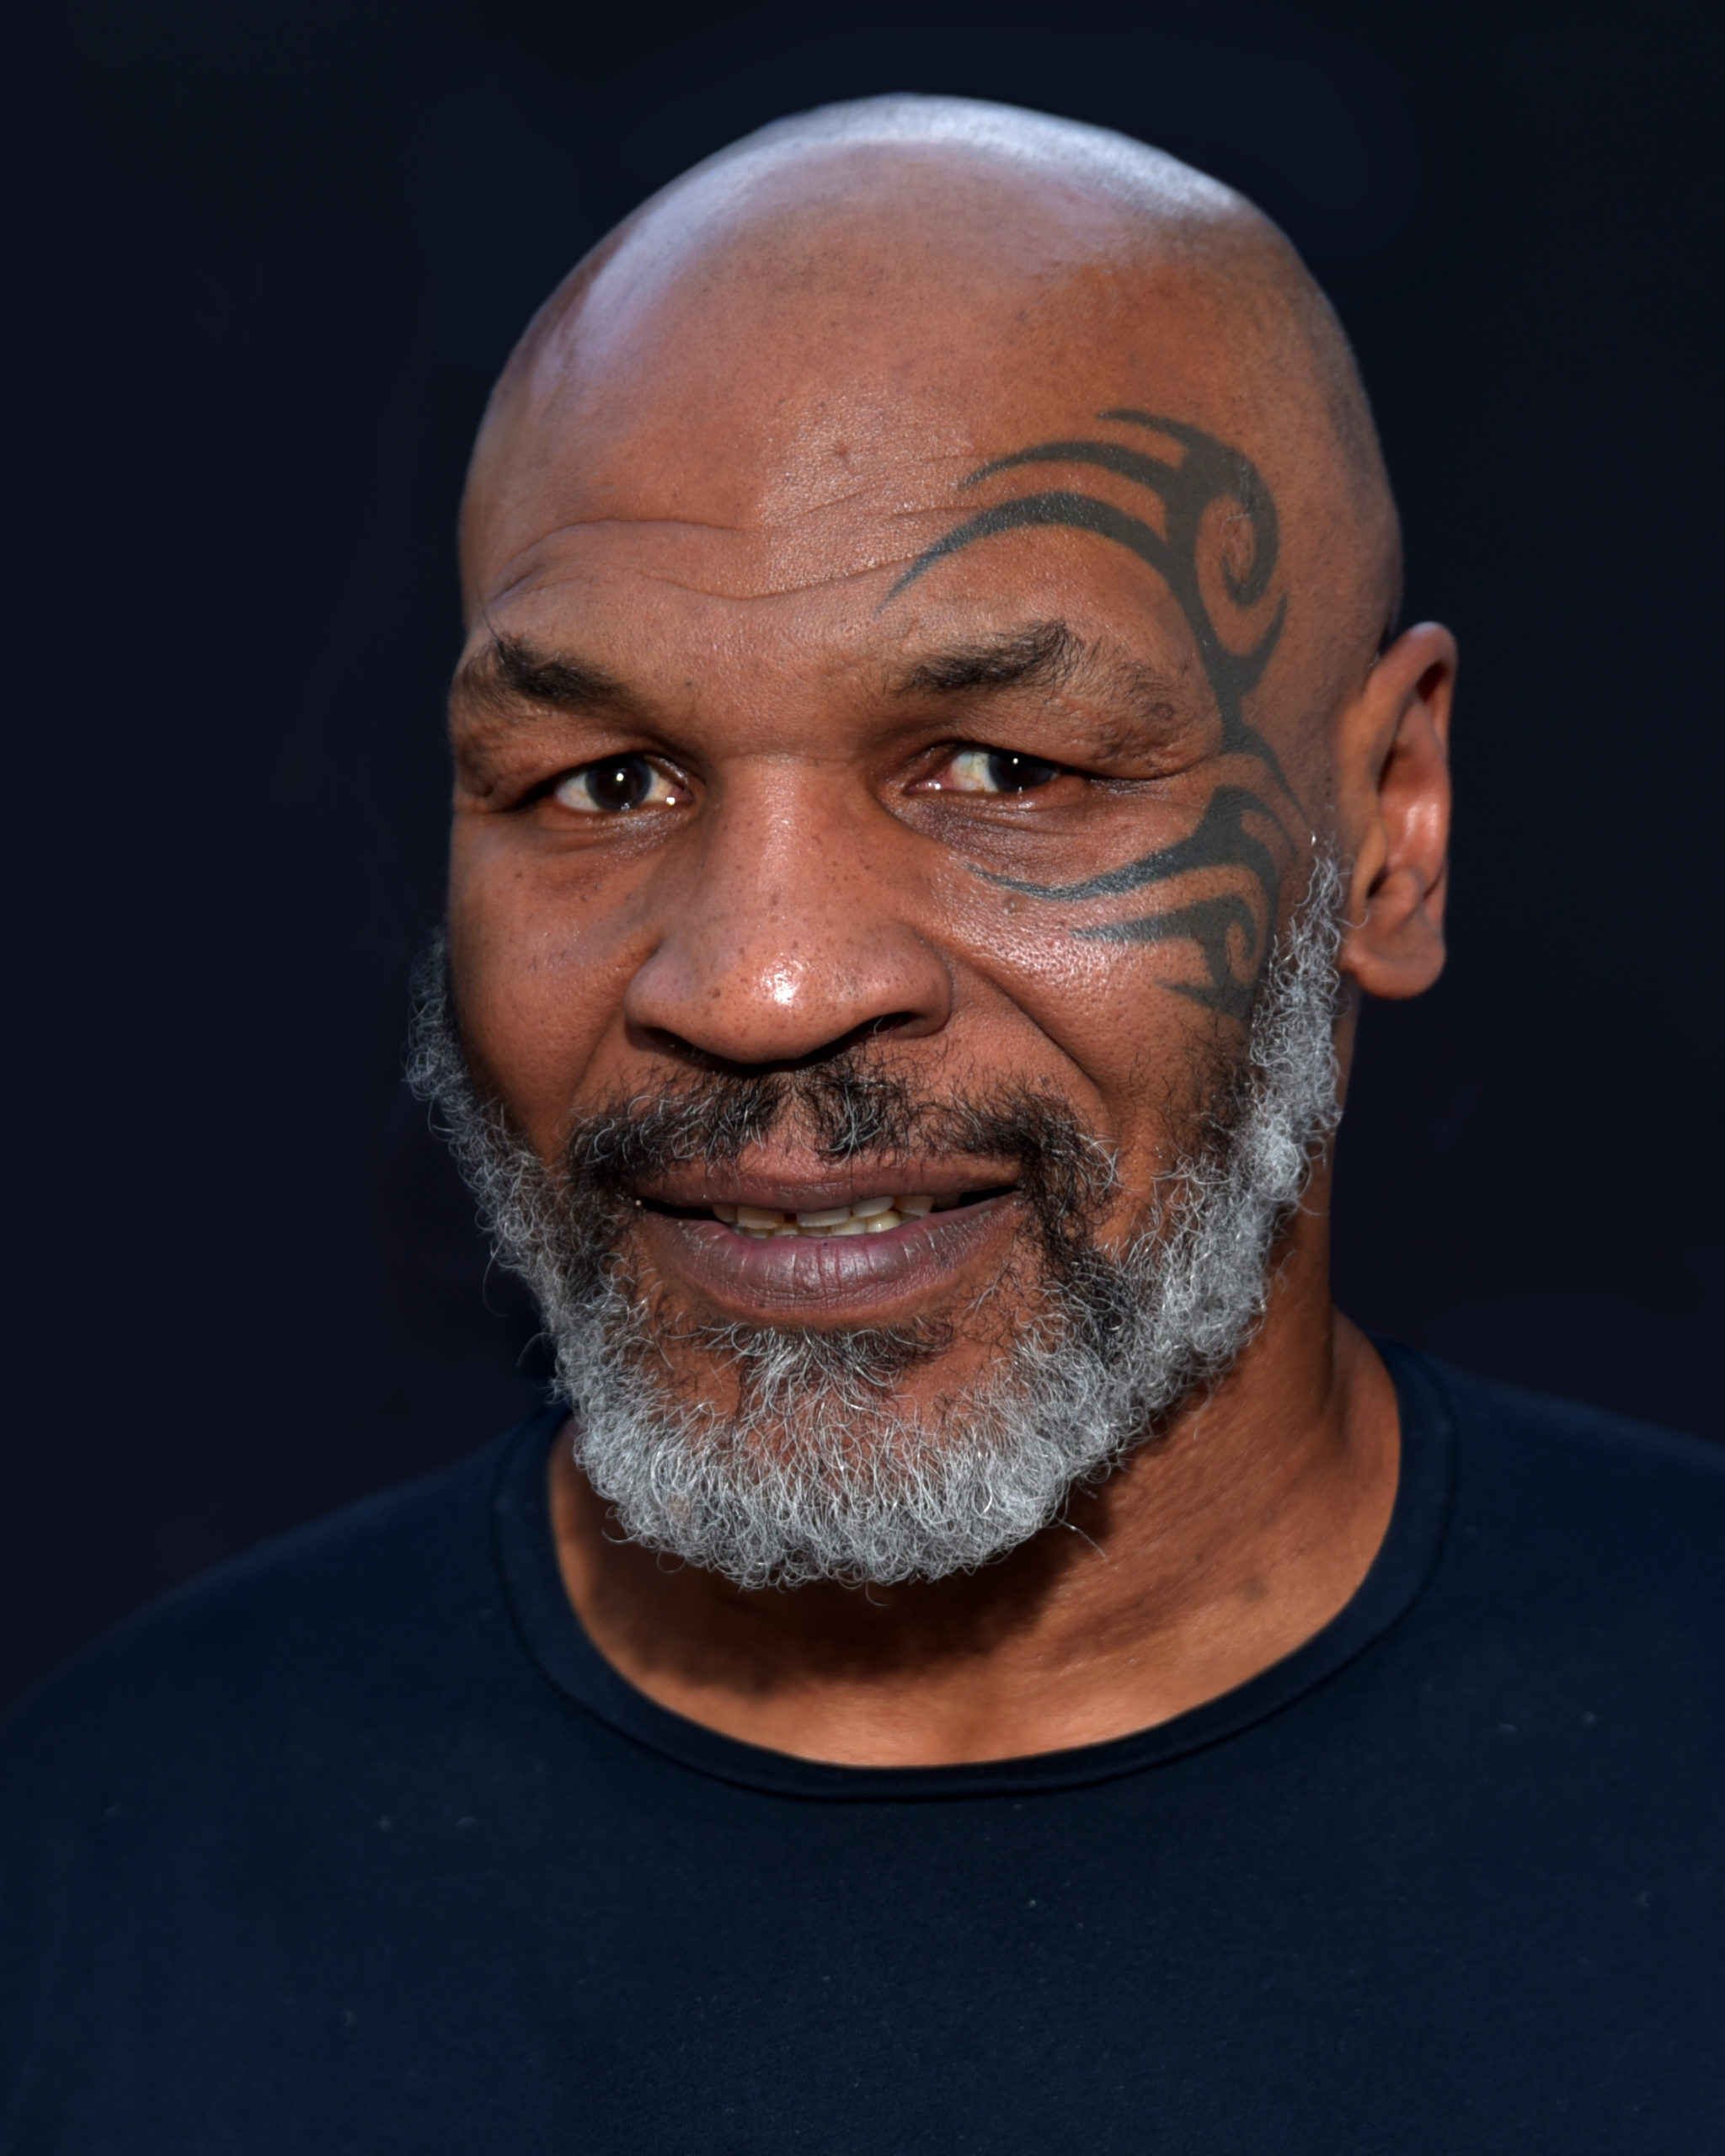 Breaking News Mike Tyson To Appear At AEW's Double or Nothing